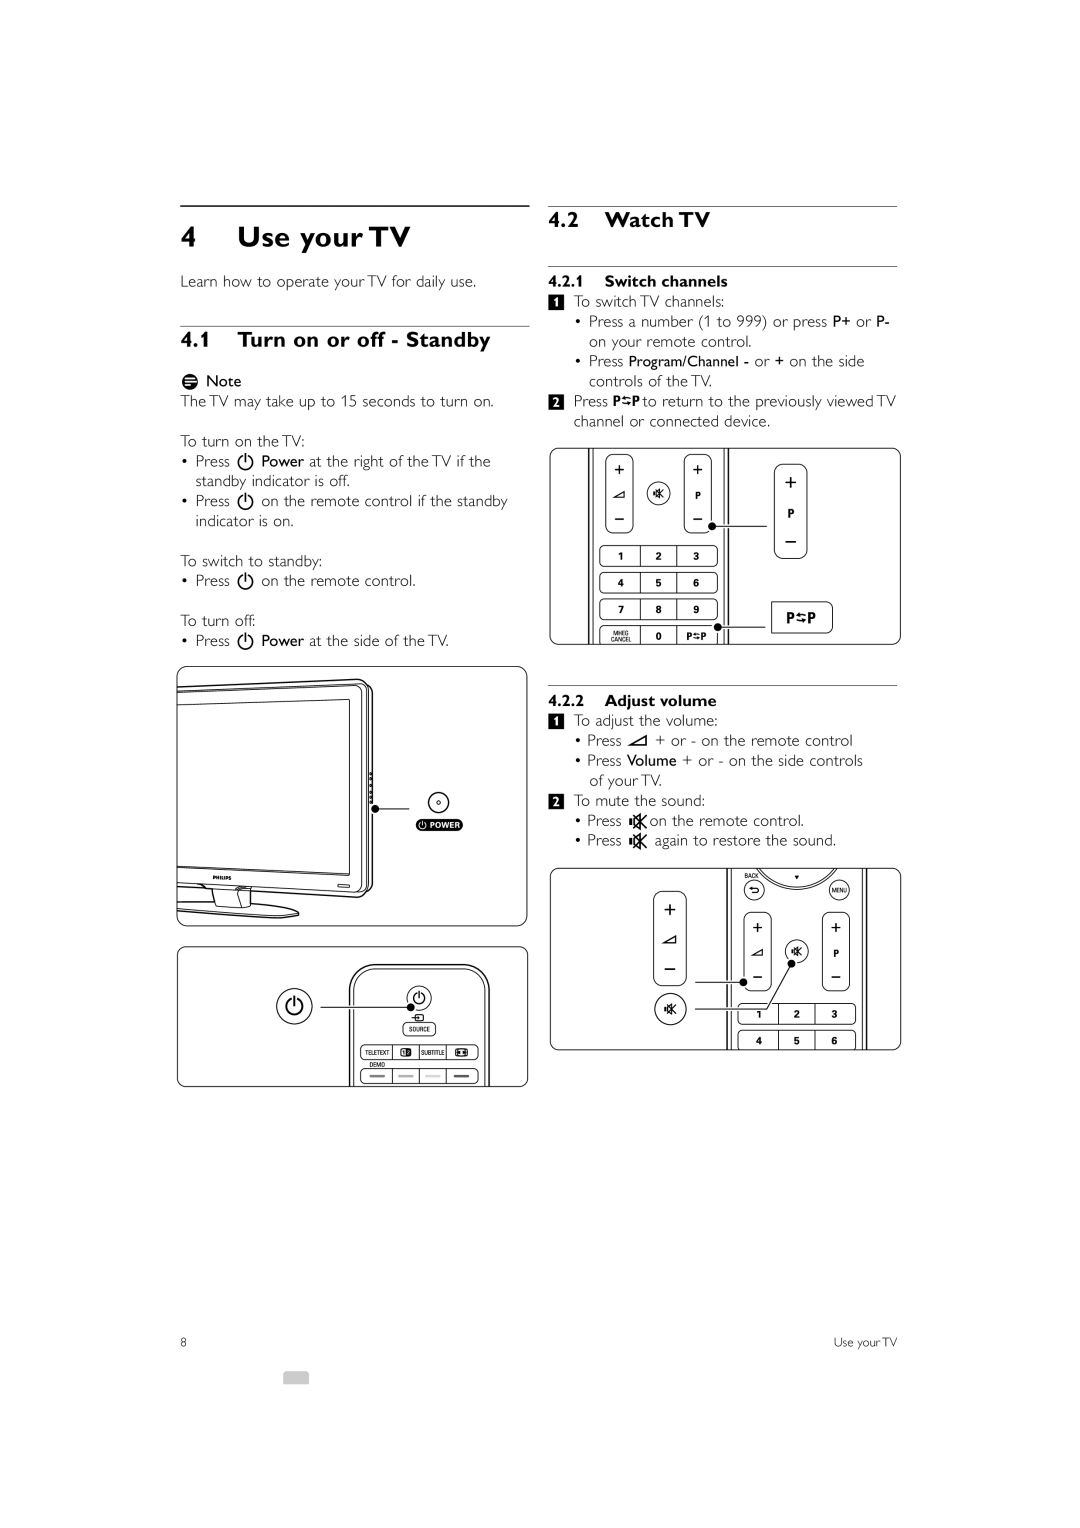 Philips 37PFL7403 manual Use your TV, Turn on or off - Standby, Watch TV, Switch channels, Adjust volume 